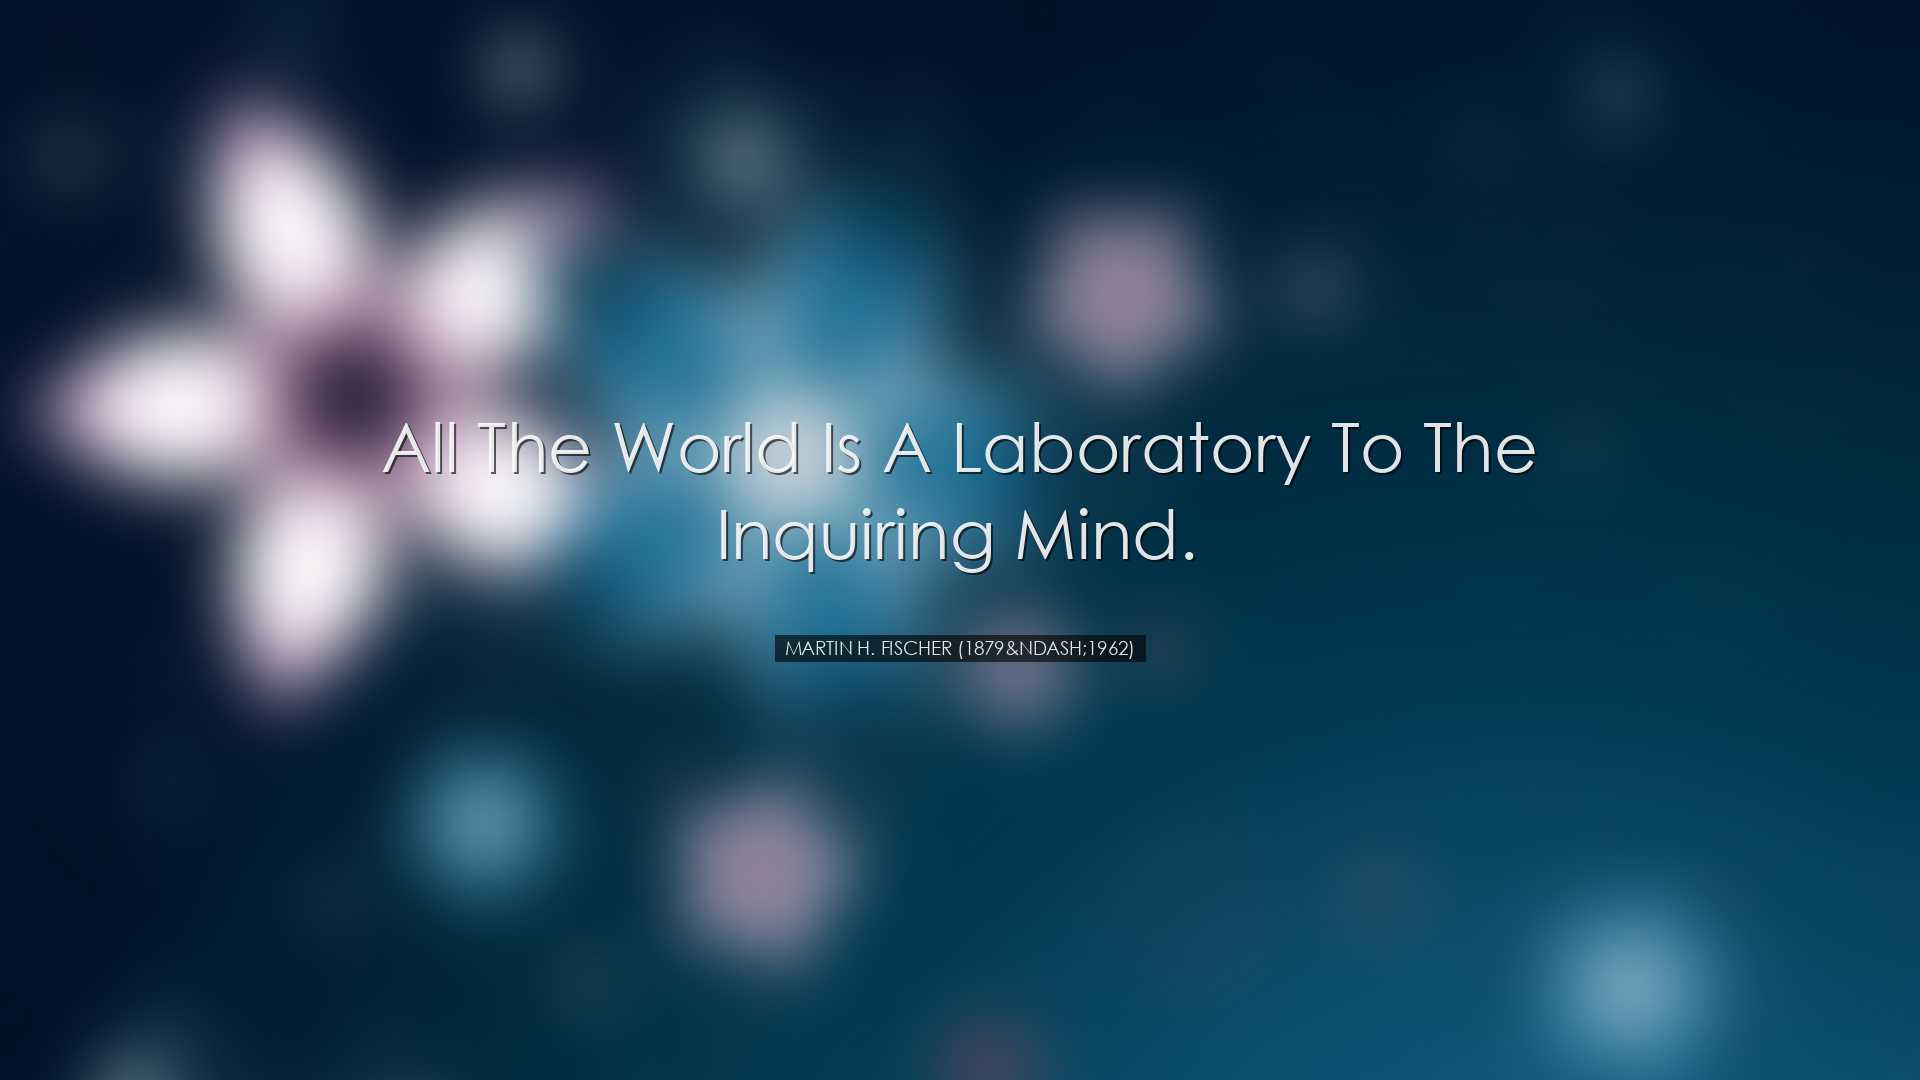 All the world is a laboratory to the inquiring mind. - Martin H. F